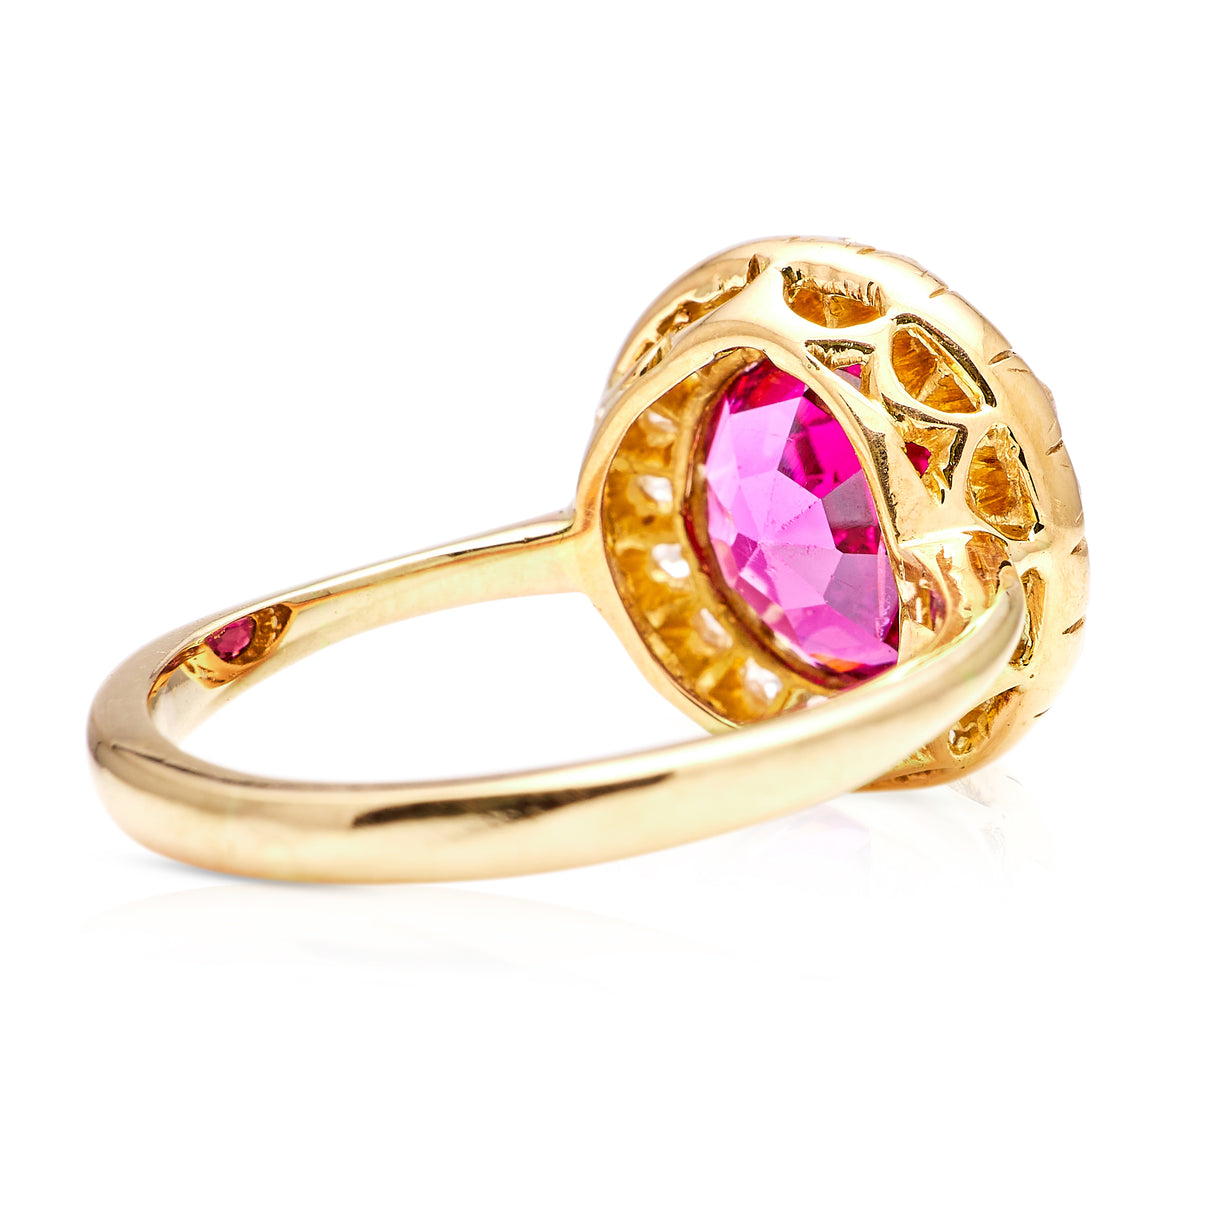 Antique, Victorian garnet and diamond cluster ring, 15ct yellow gold